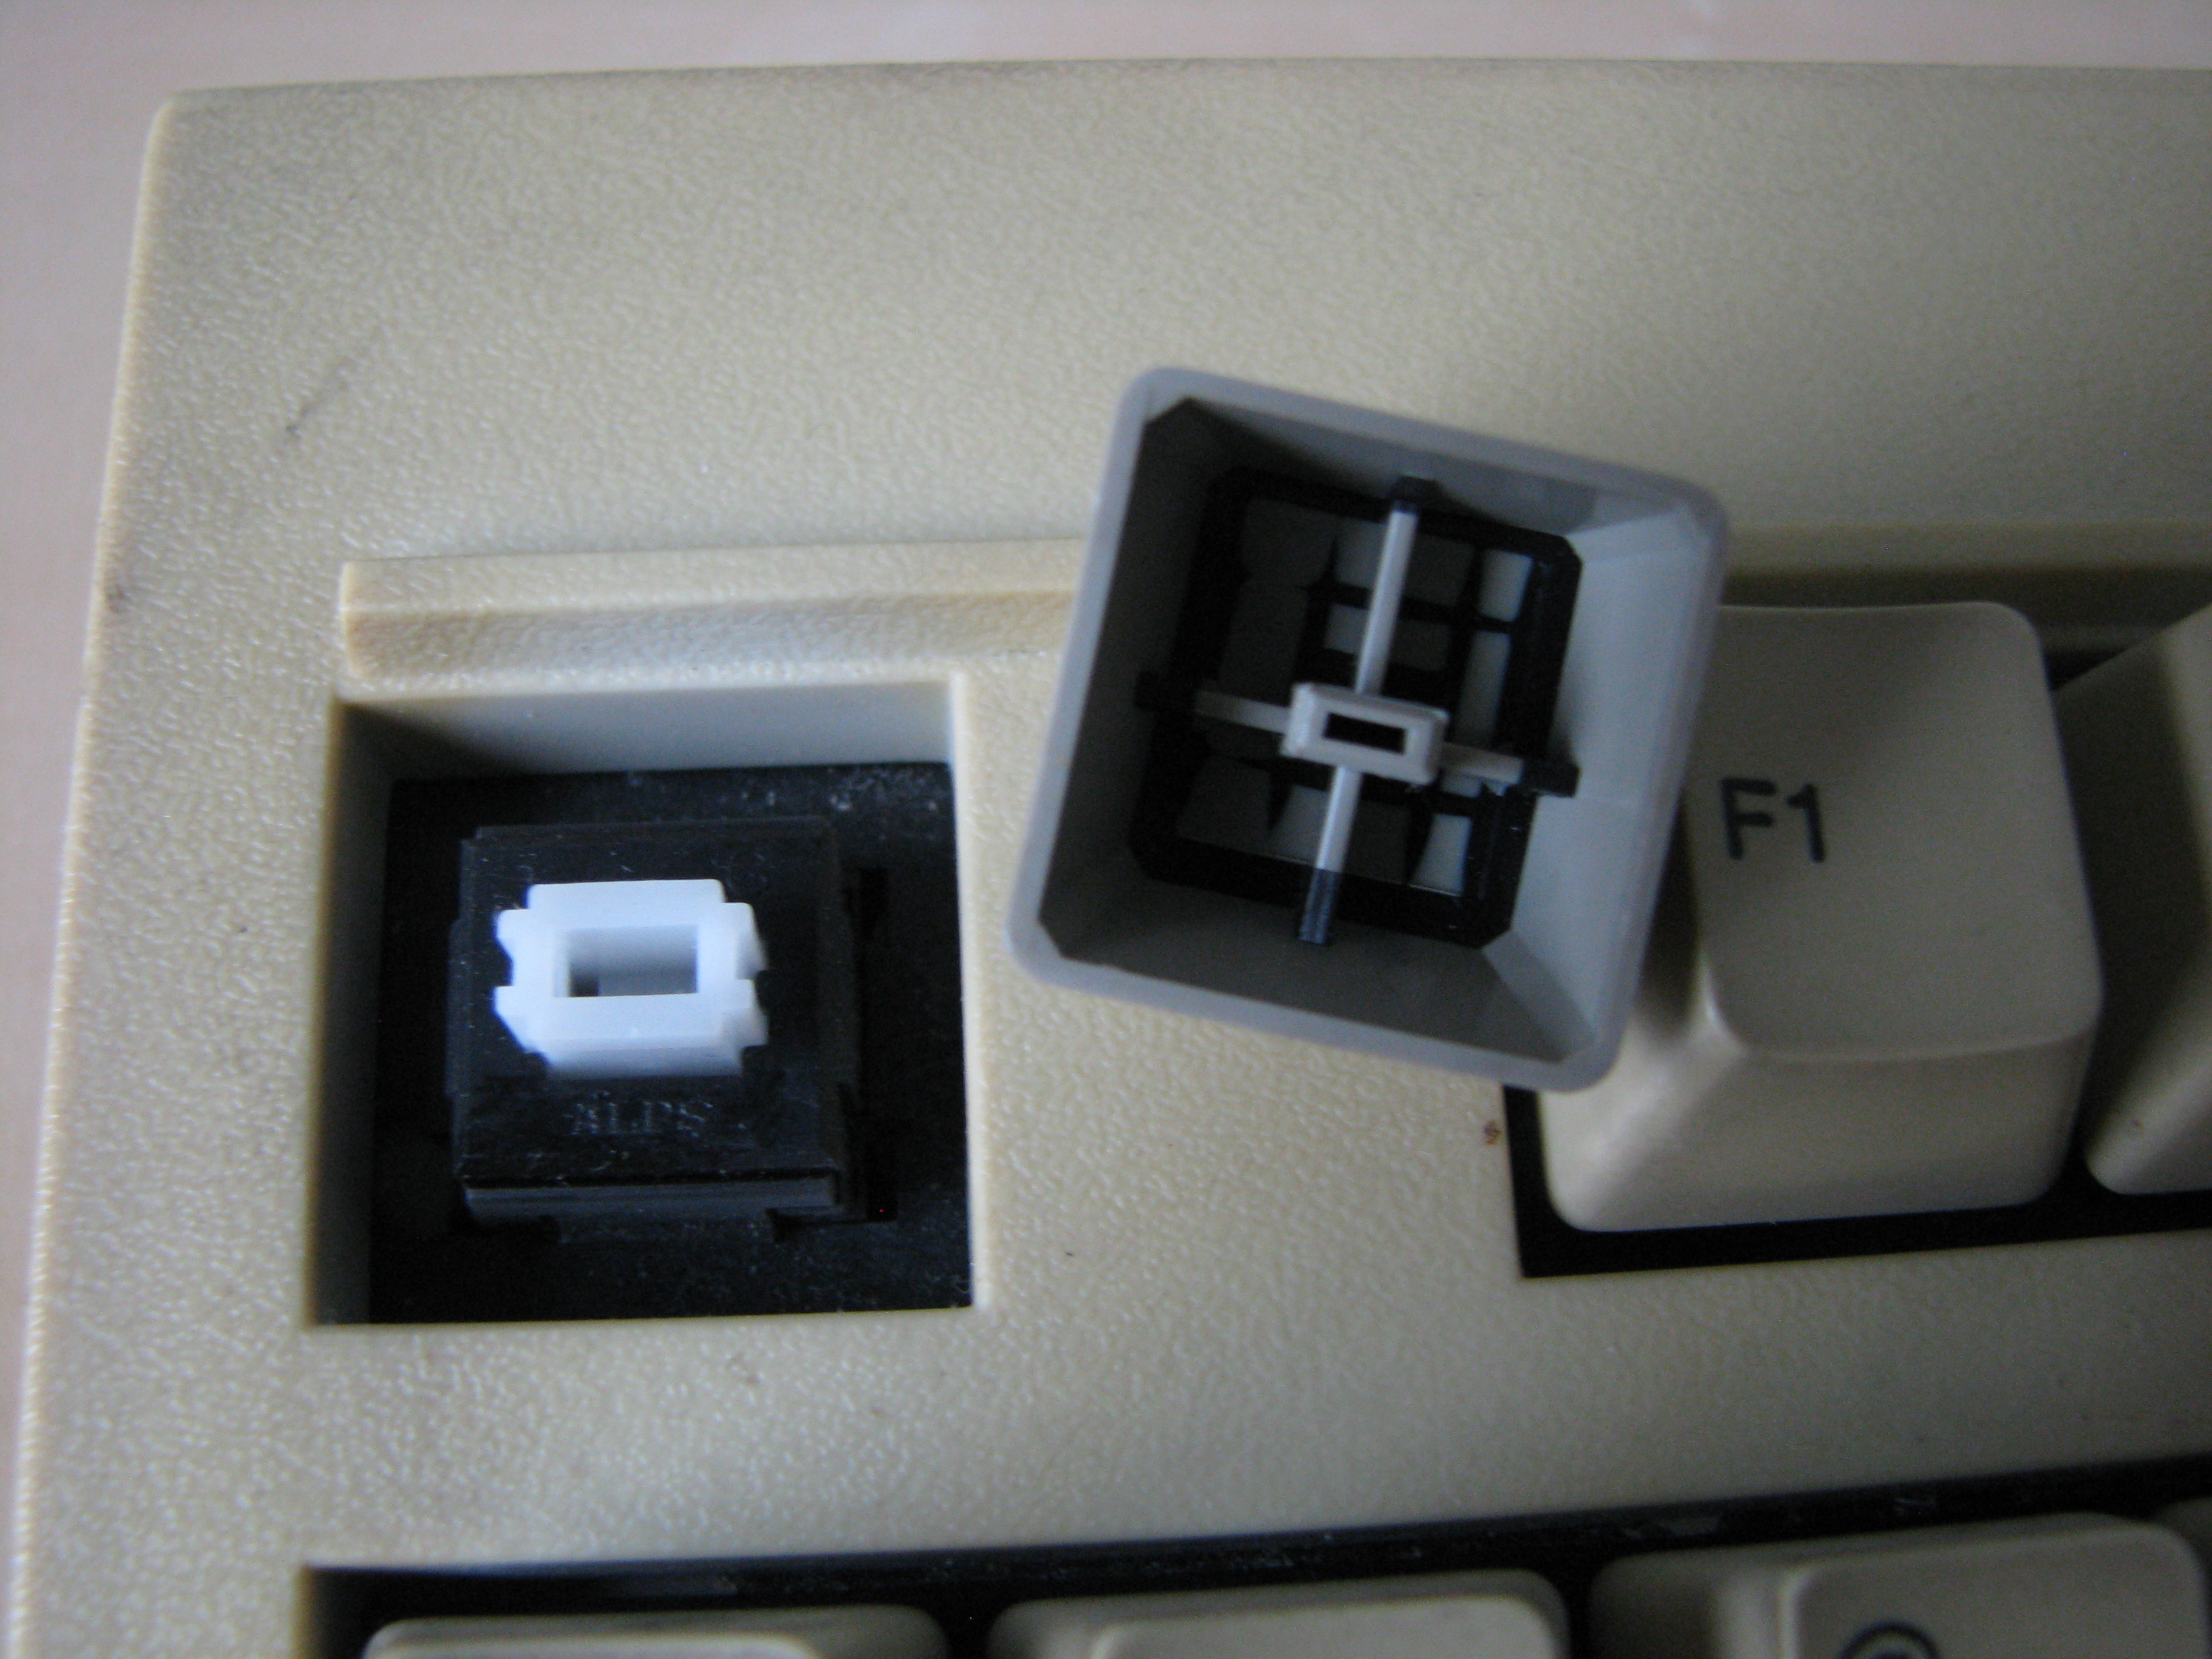 detail of the switch and keycap